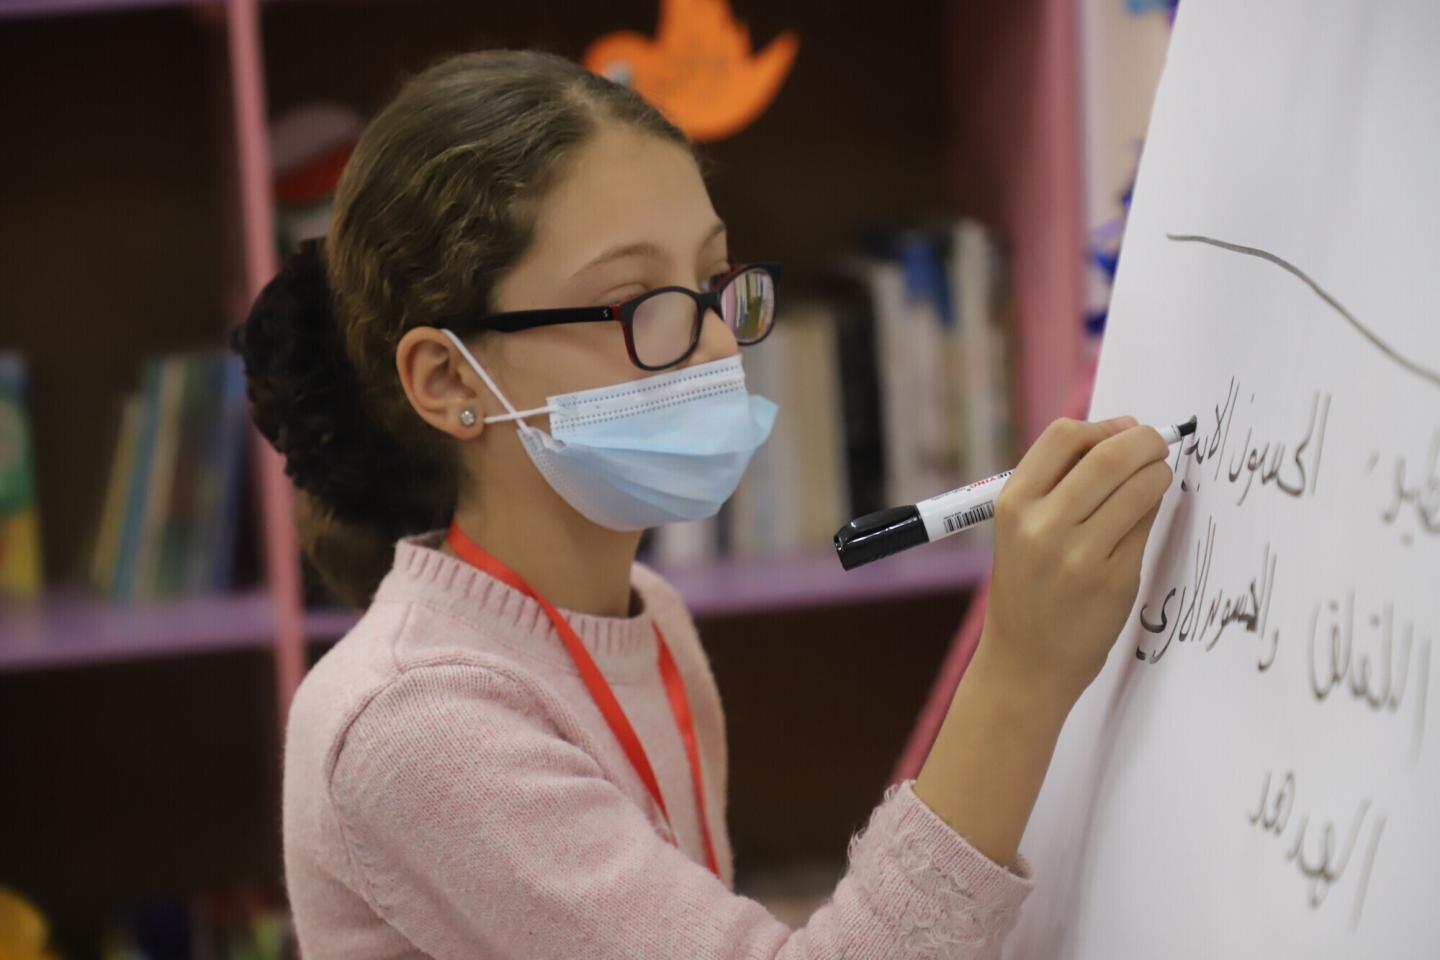  A girl in a face mask writes on a flip chart with a black marker